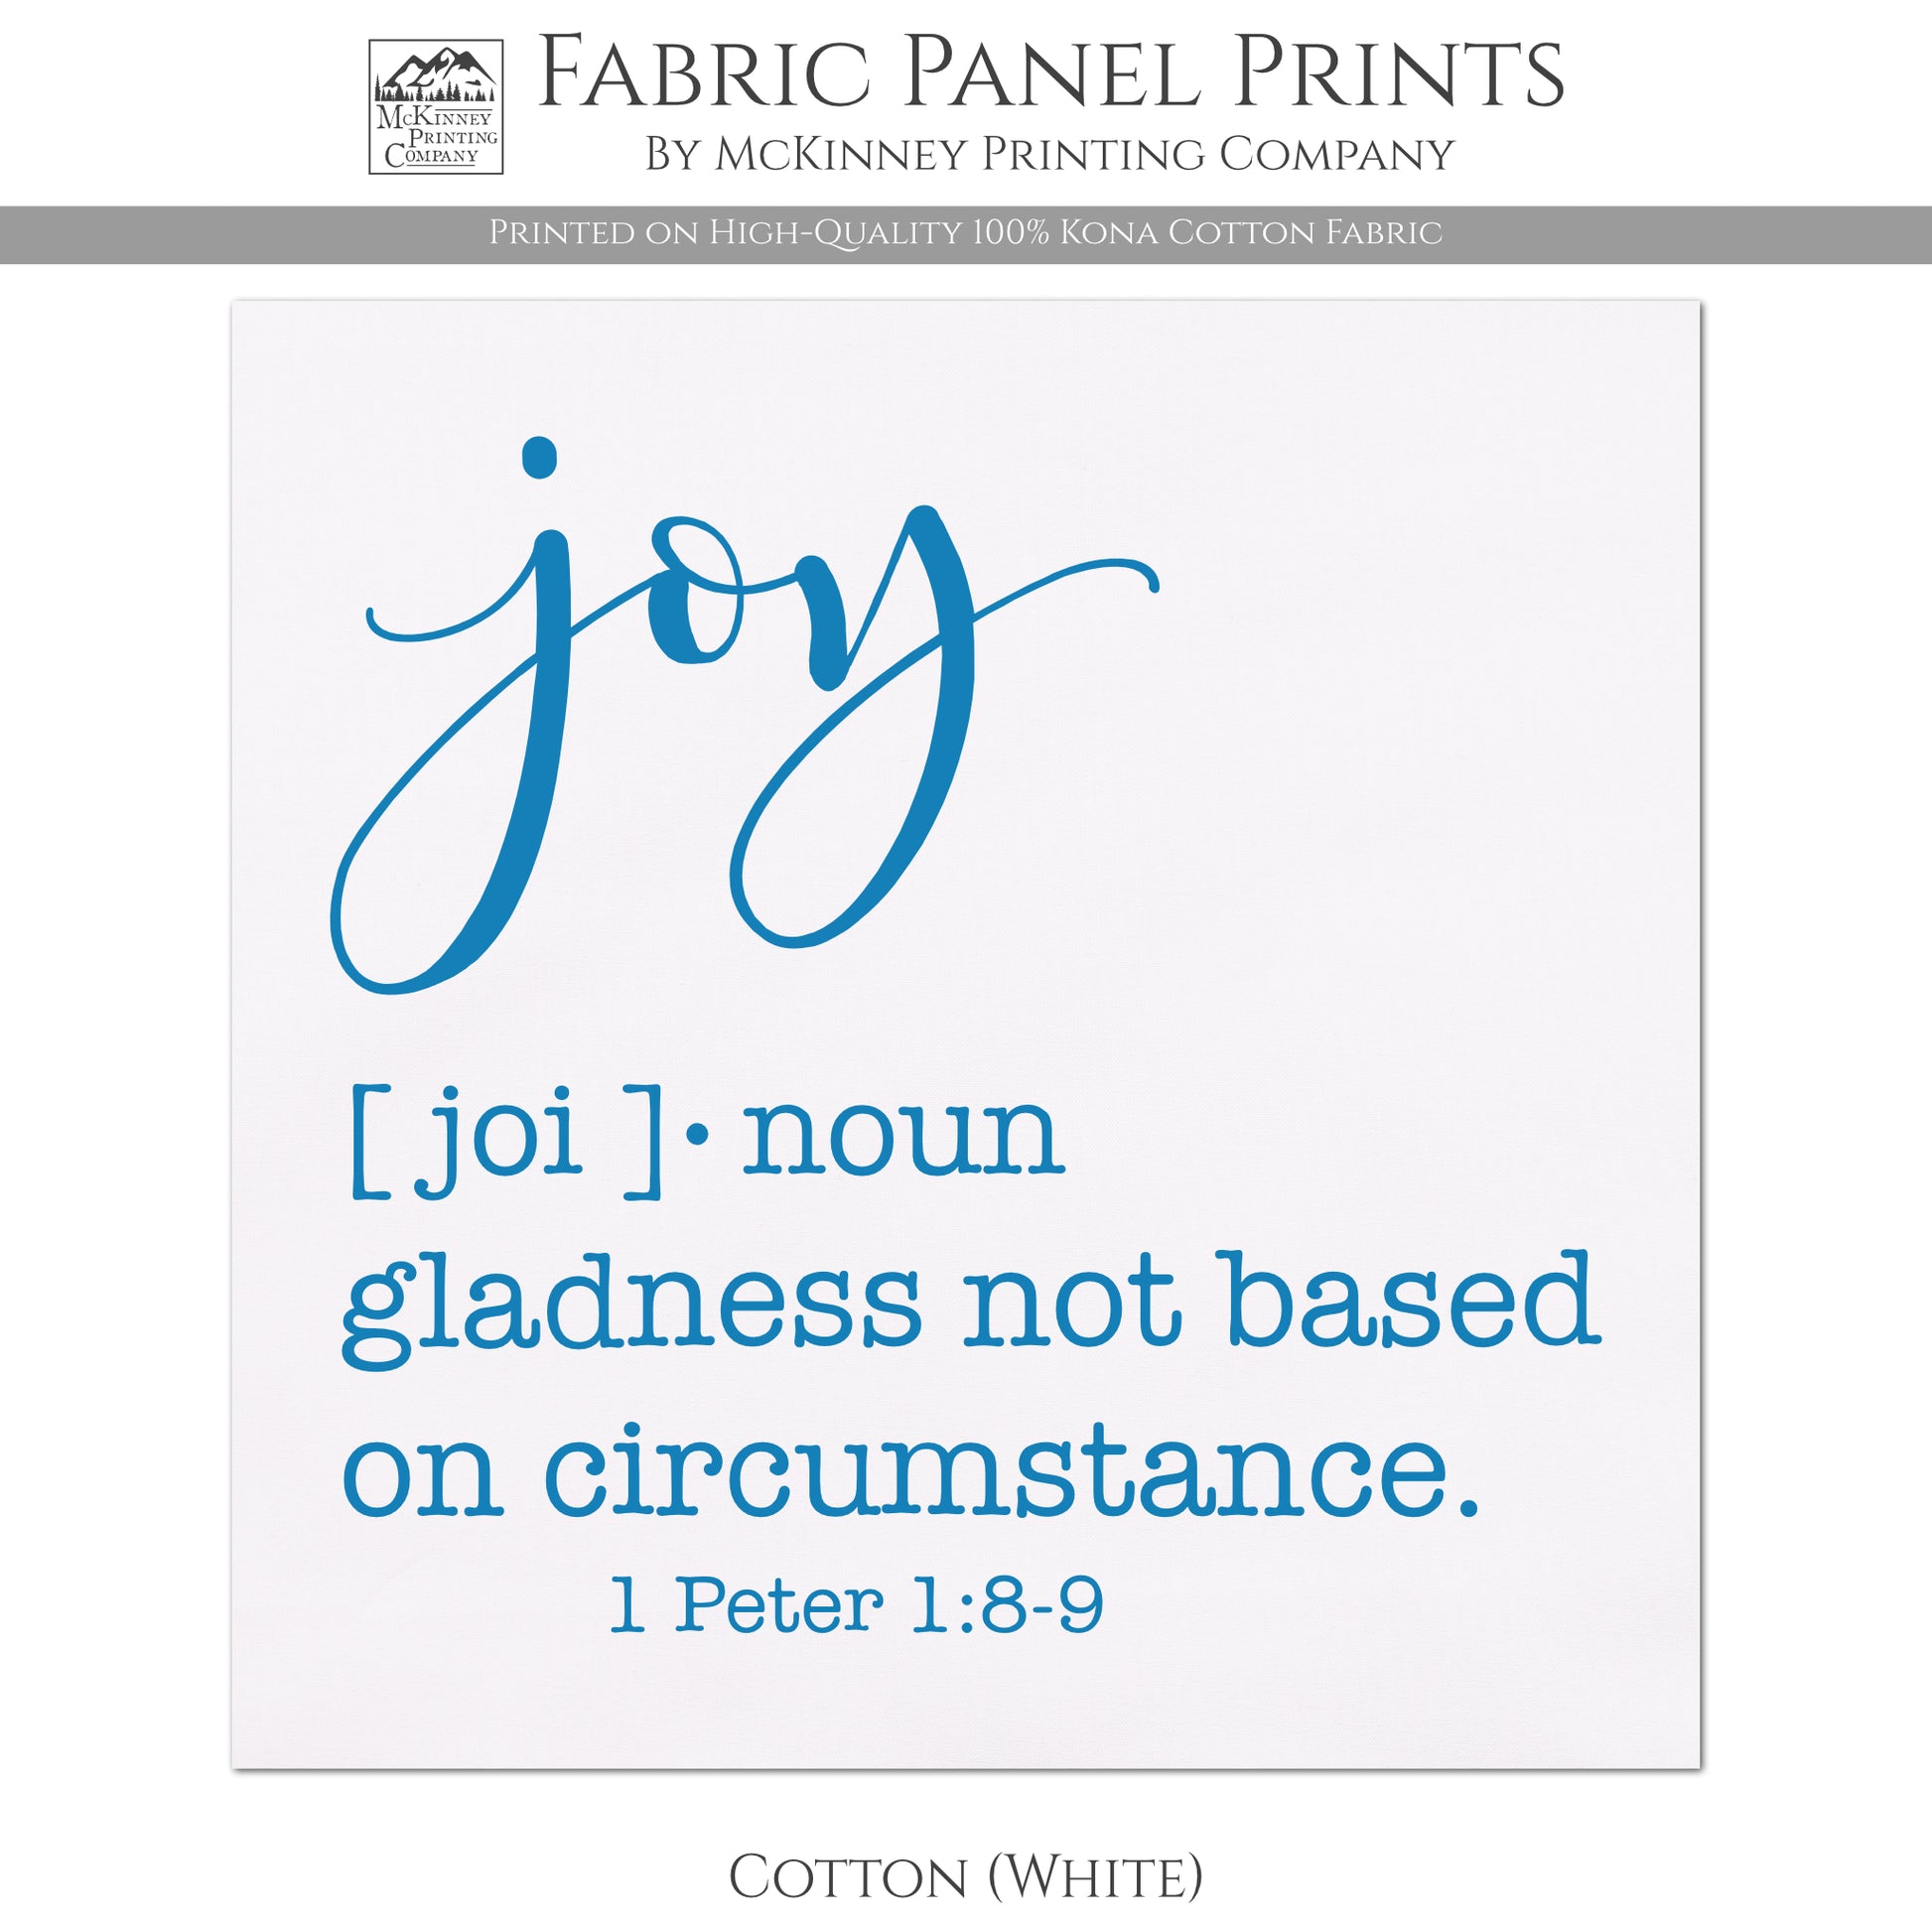 Joy Fabric - Gladness not based on circumstance - 1 Peter 1 8-9 - Cotton, White